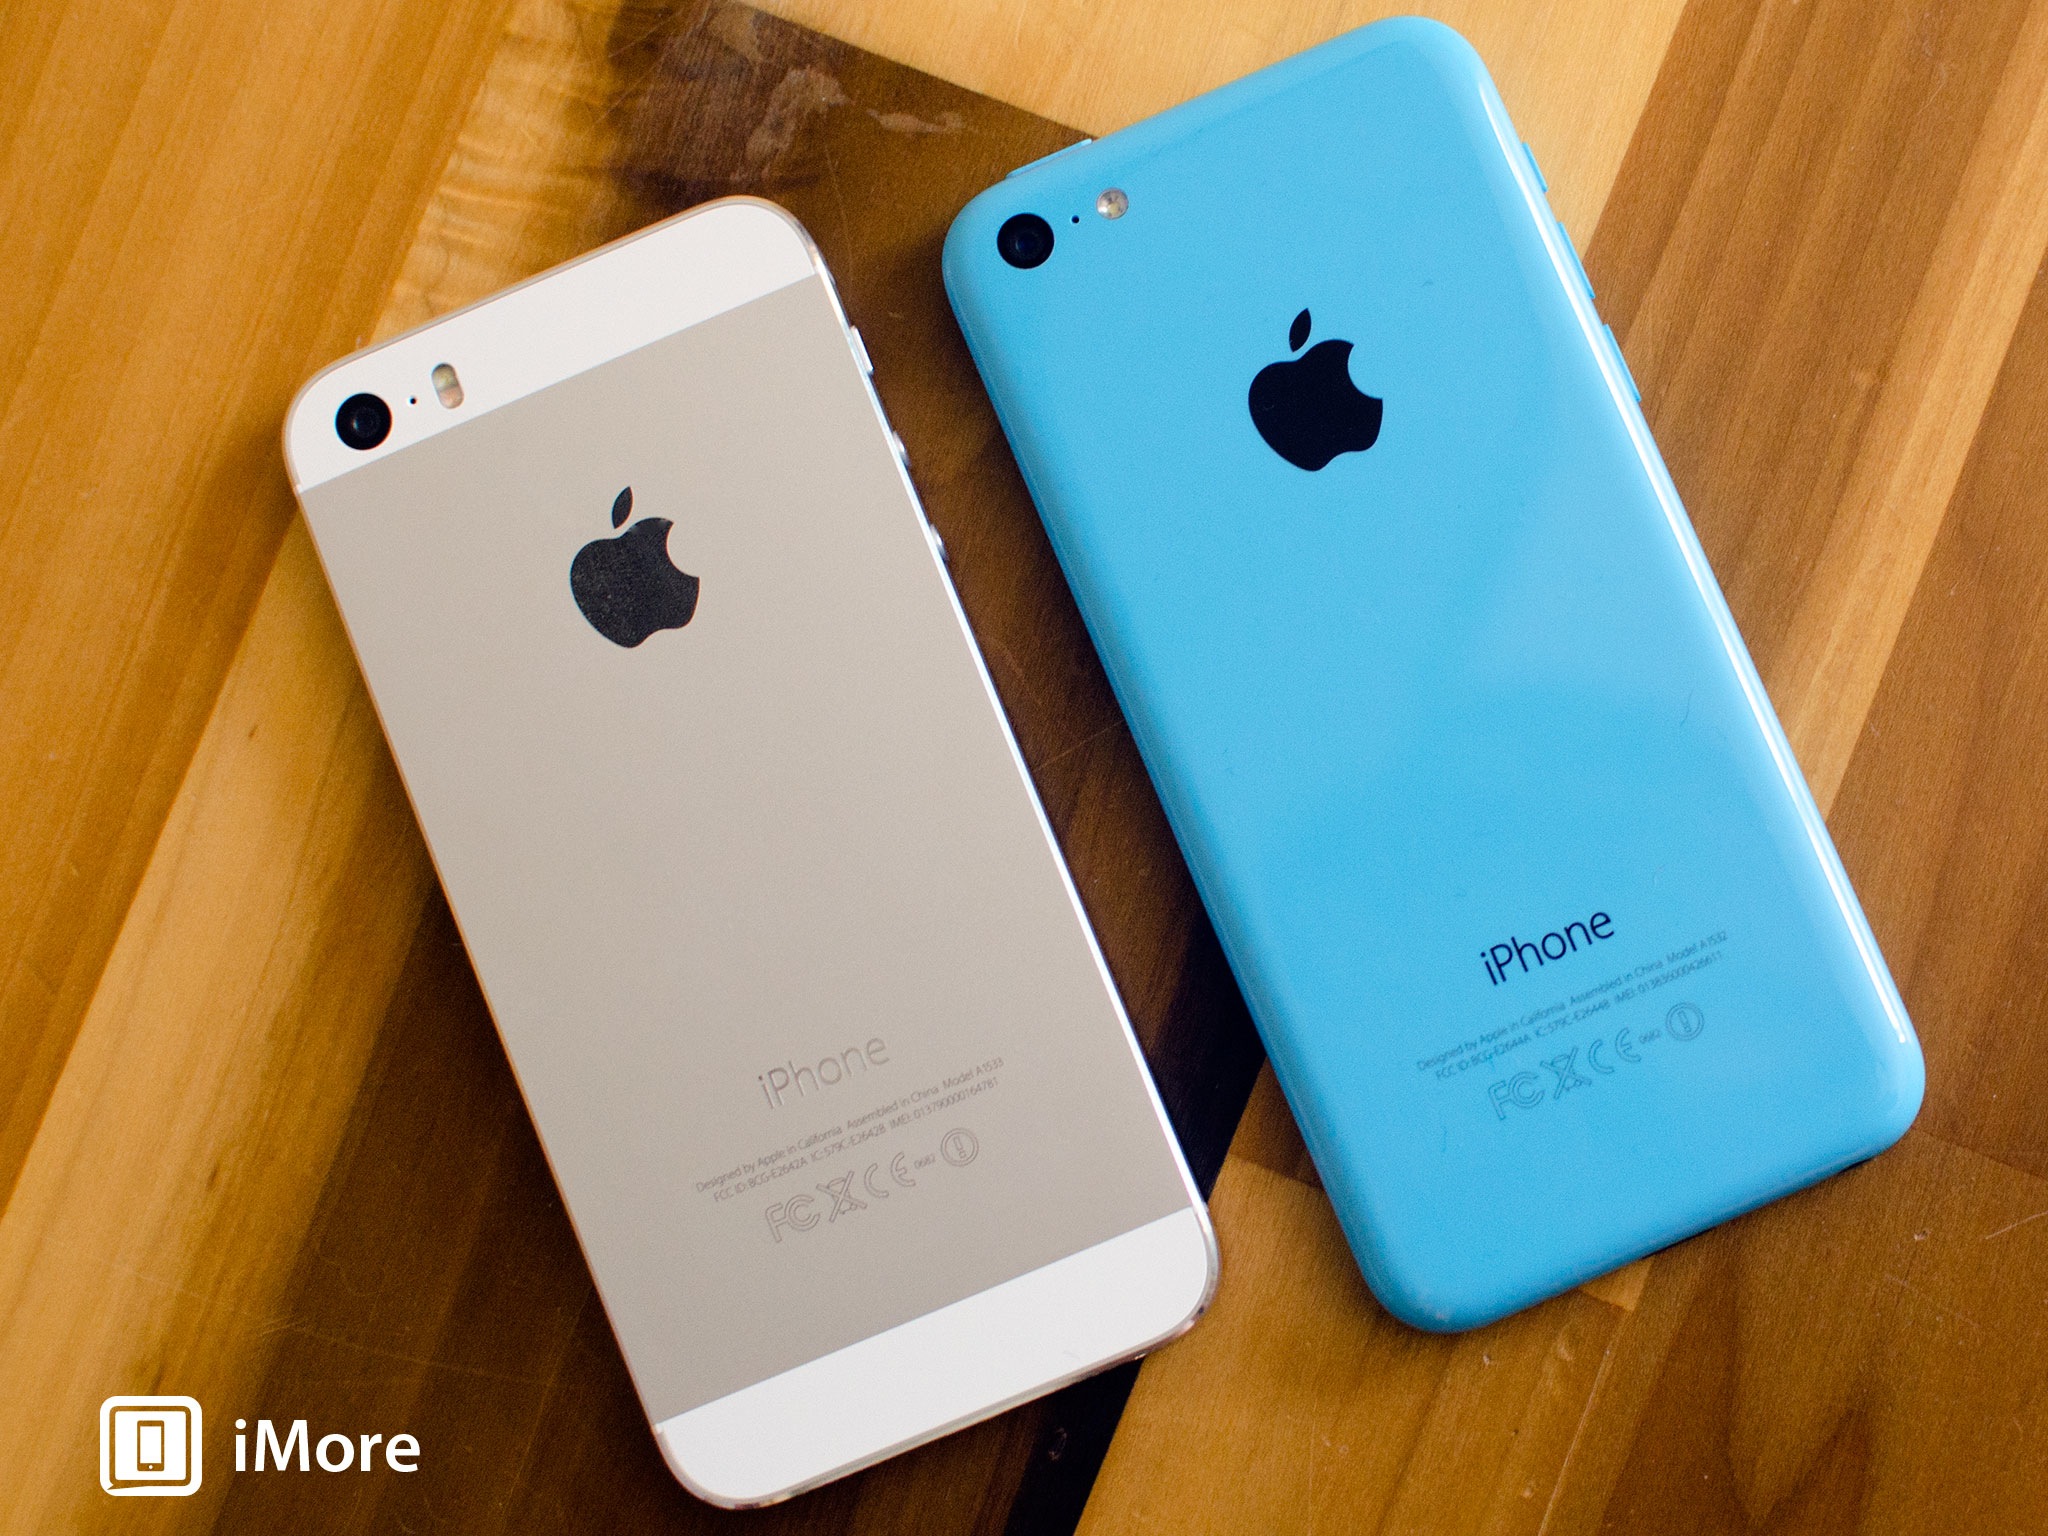 Apple supposedly cutting iPhone 5c production in half due to low demand